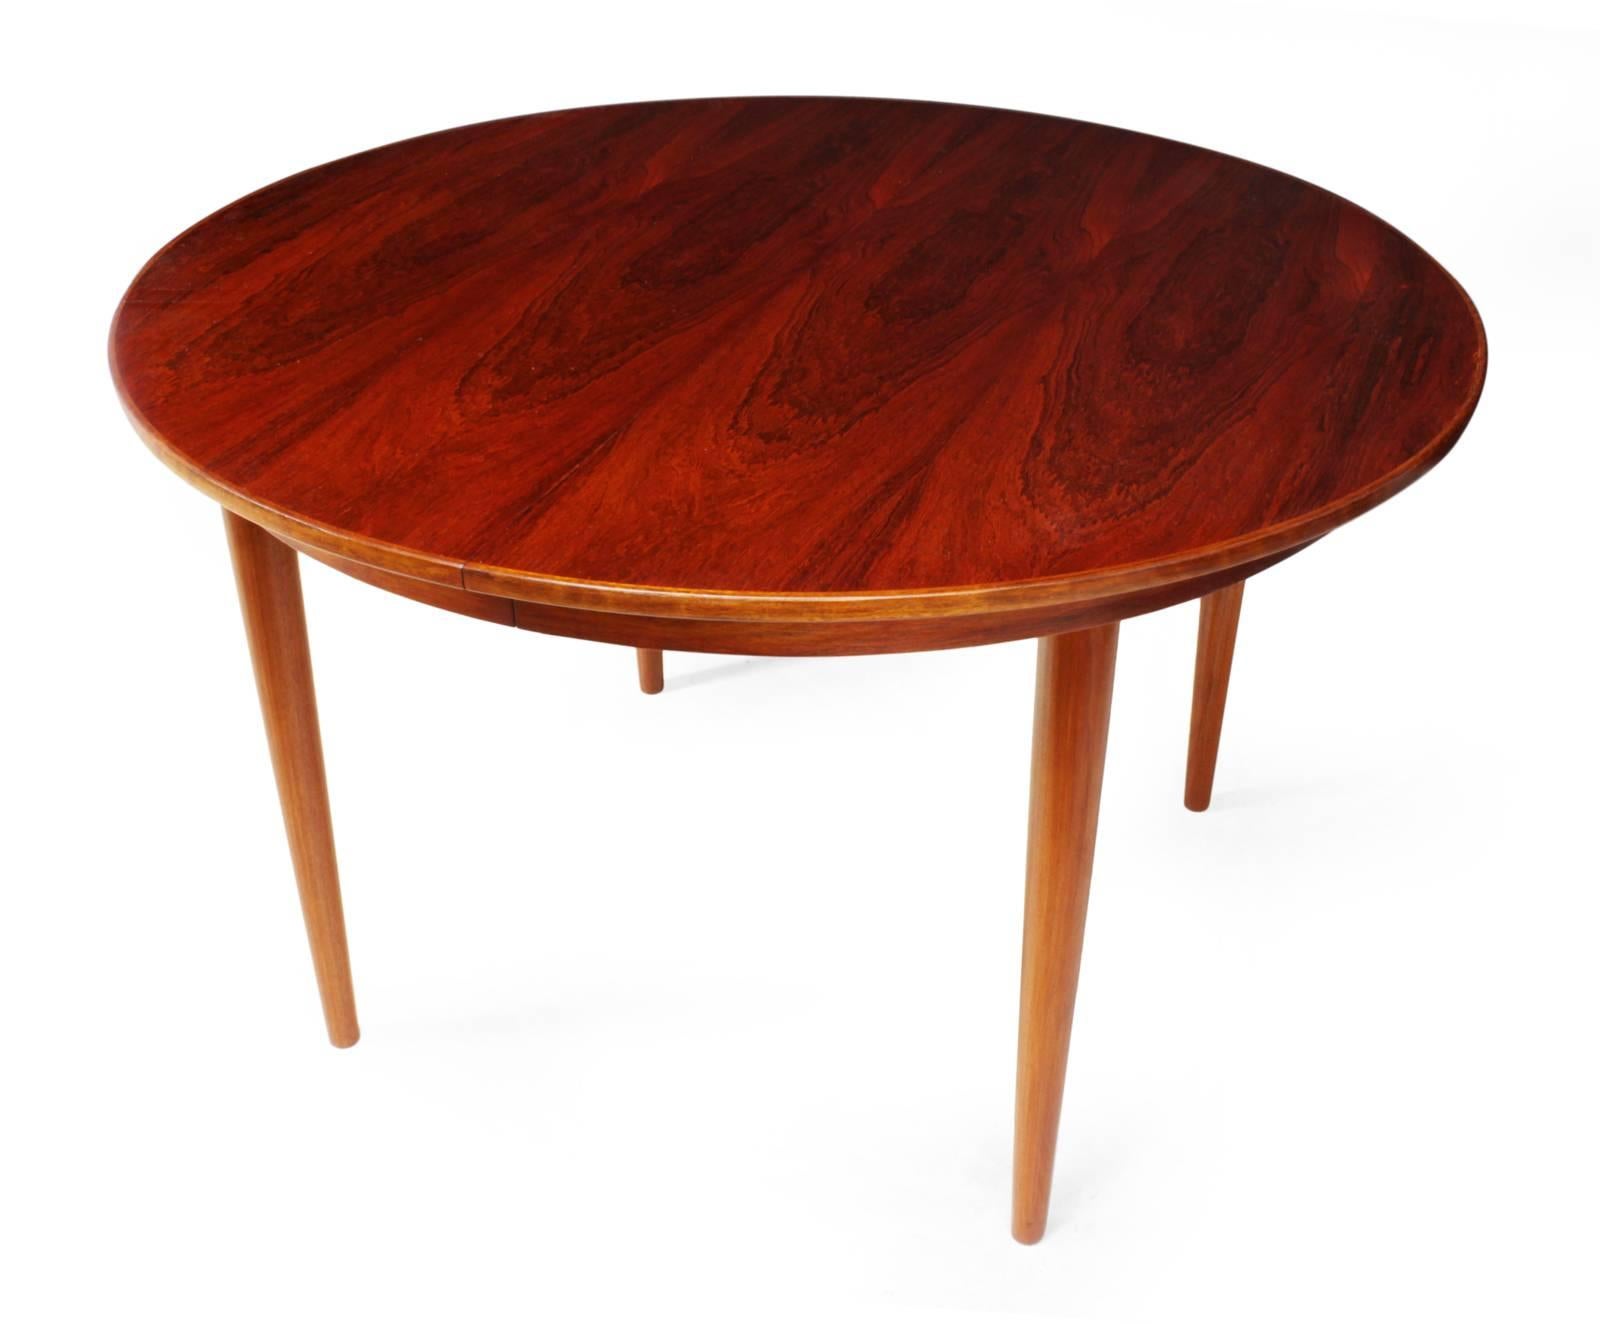 Mid-20th Century Danish Rosewood Dining Table